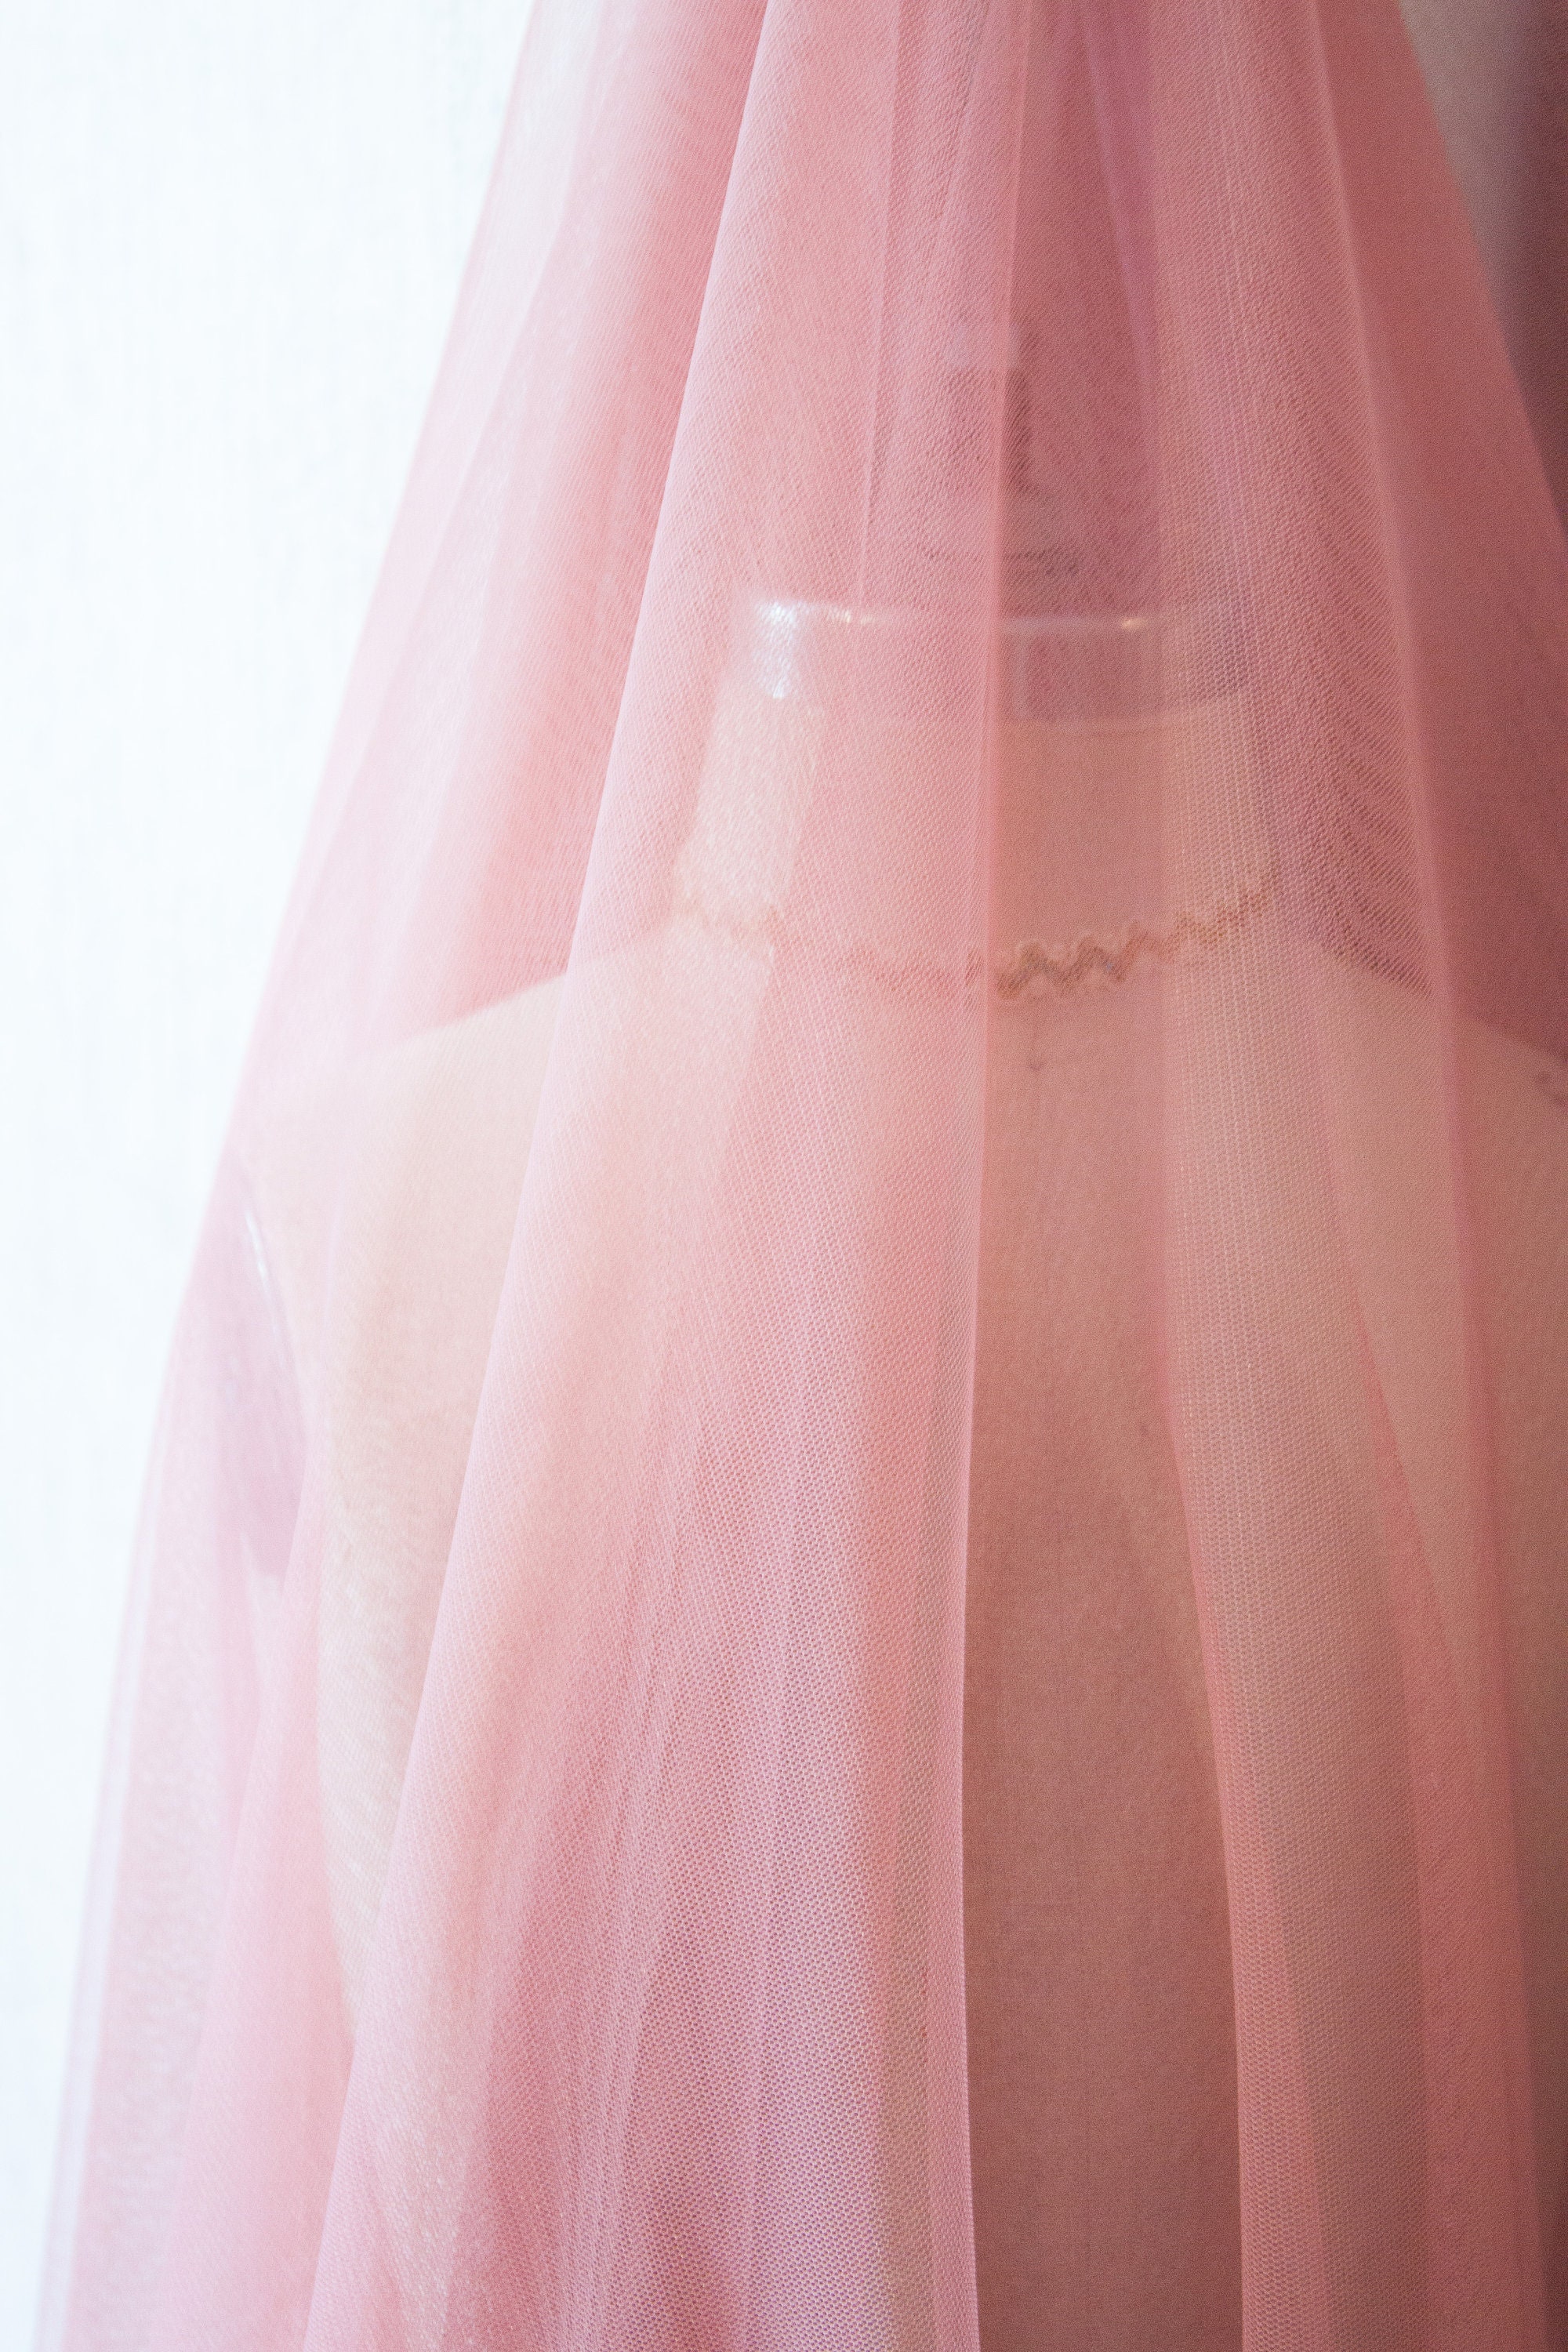 Rose Pink Tulle Dusty Pink Fabric, Dusty Pink Tulle, Sandy Pink Soft  Fabric, Stretch Mesh Fabric, Pink Tutu Tulle, Stretch Tulle, Pink Tulle 